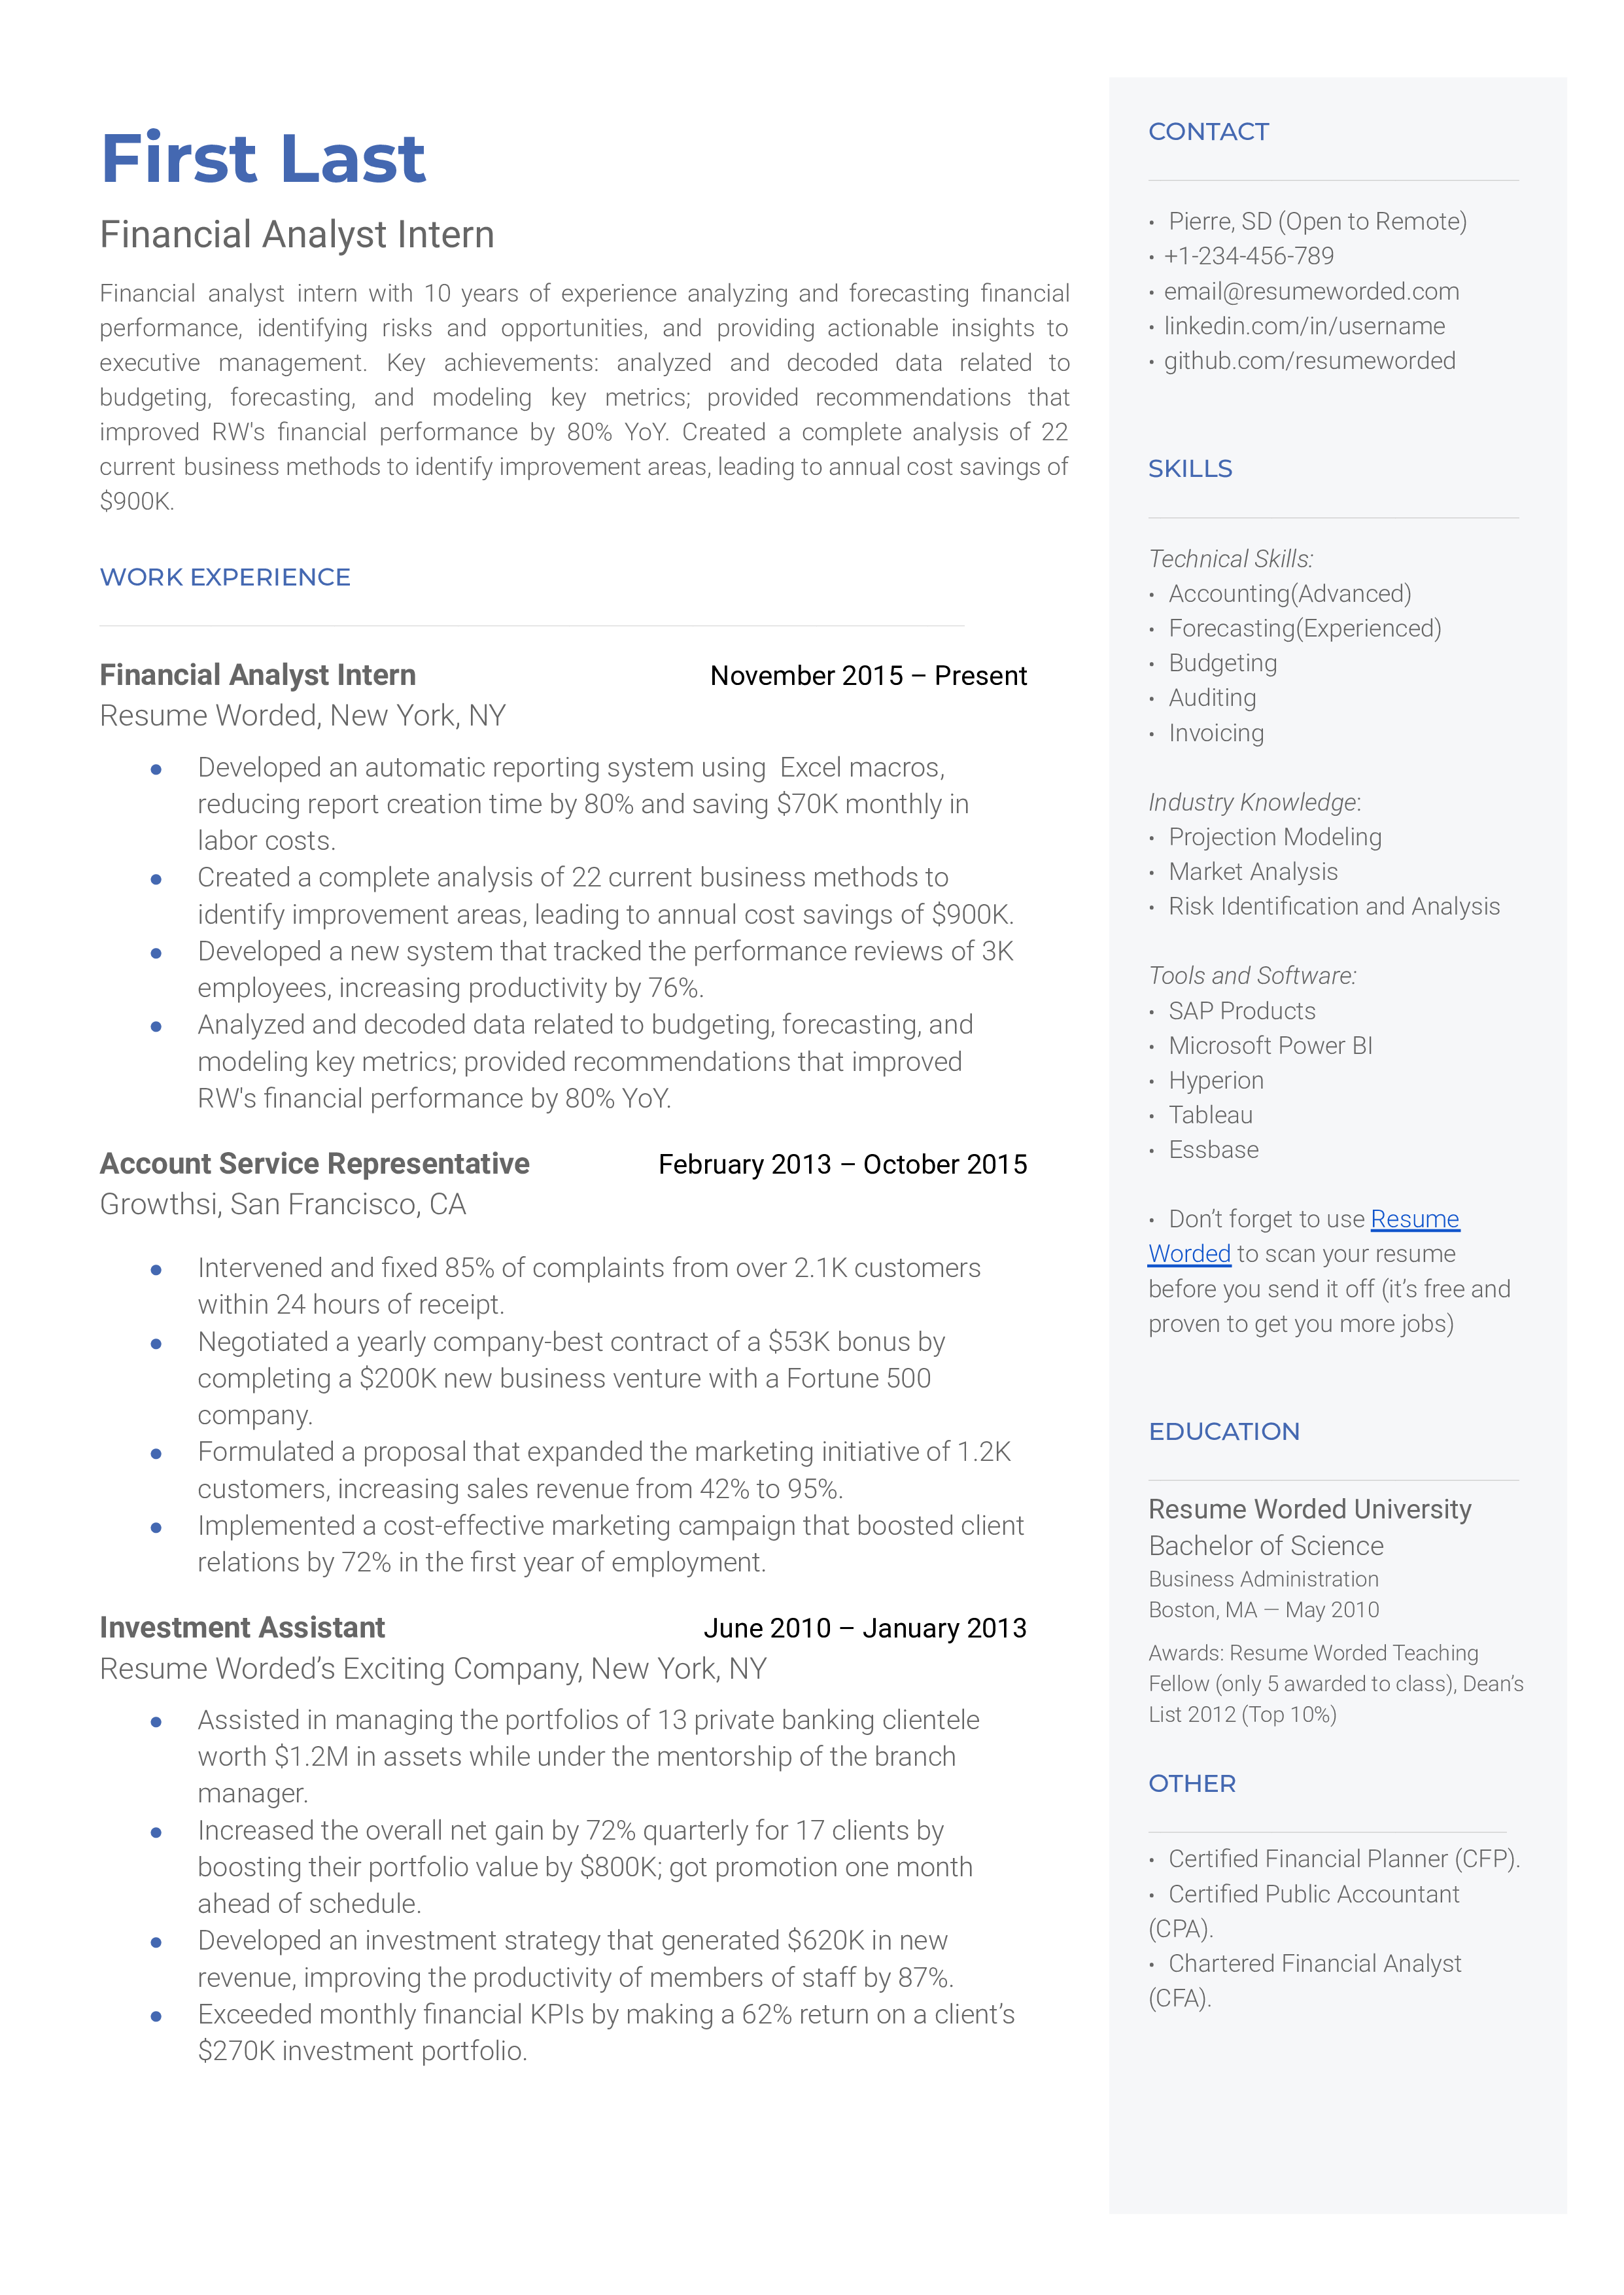 An example of a CV for a Financial Analyst Intern role.